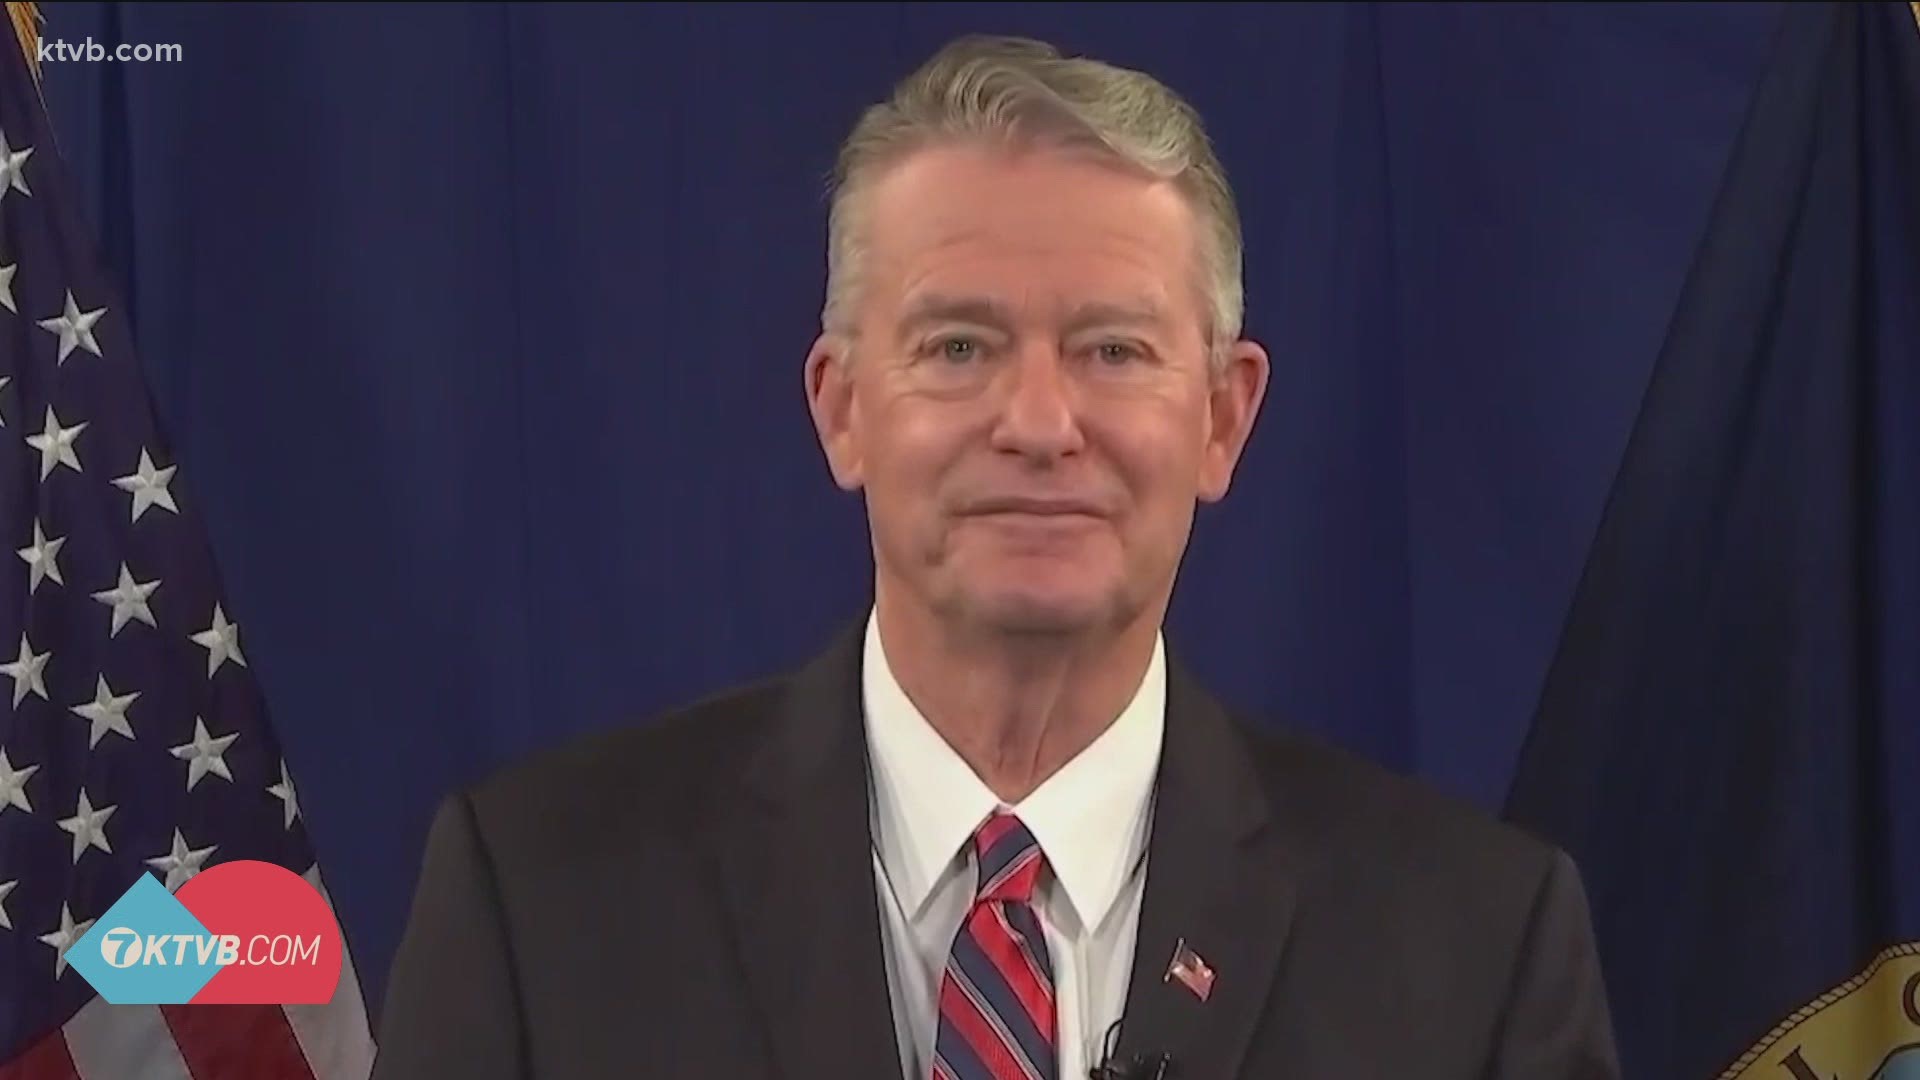 We have the highlights and reaction to the governor's State of the State Address.